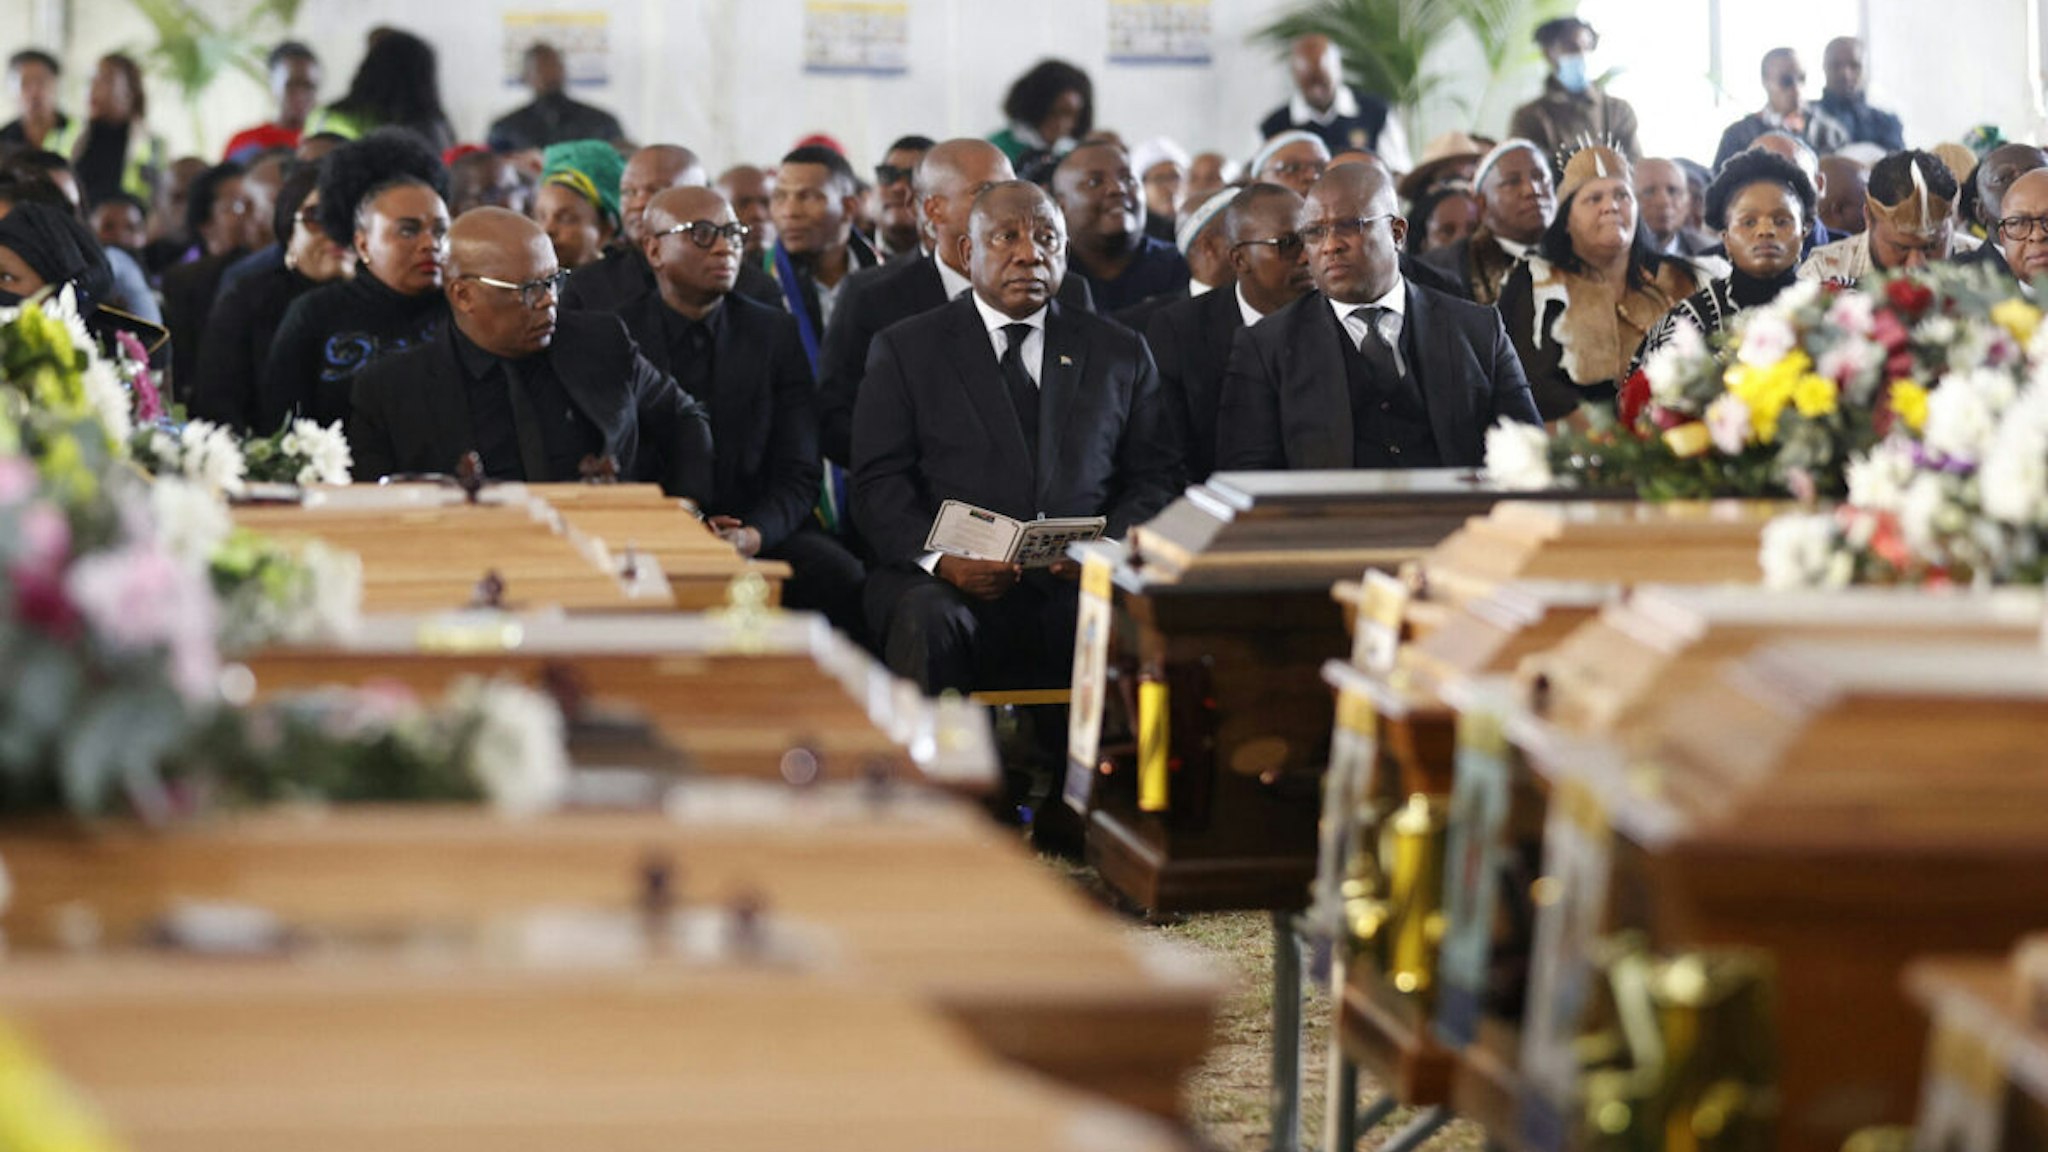 South African President Cyril Ramaphosa (C) looks on during a symbolic mass memorial service in East London on July 6, 2022, after 21 people, mostly teens, died in unclear circumstances at a township tavern last month, in an incident that shocked South Africa. (Photo by Phill Magakoe / AFP) (Photo by PHILL MAGAKOE/AFP via Getty Images)